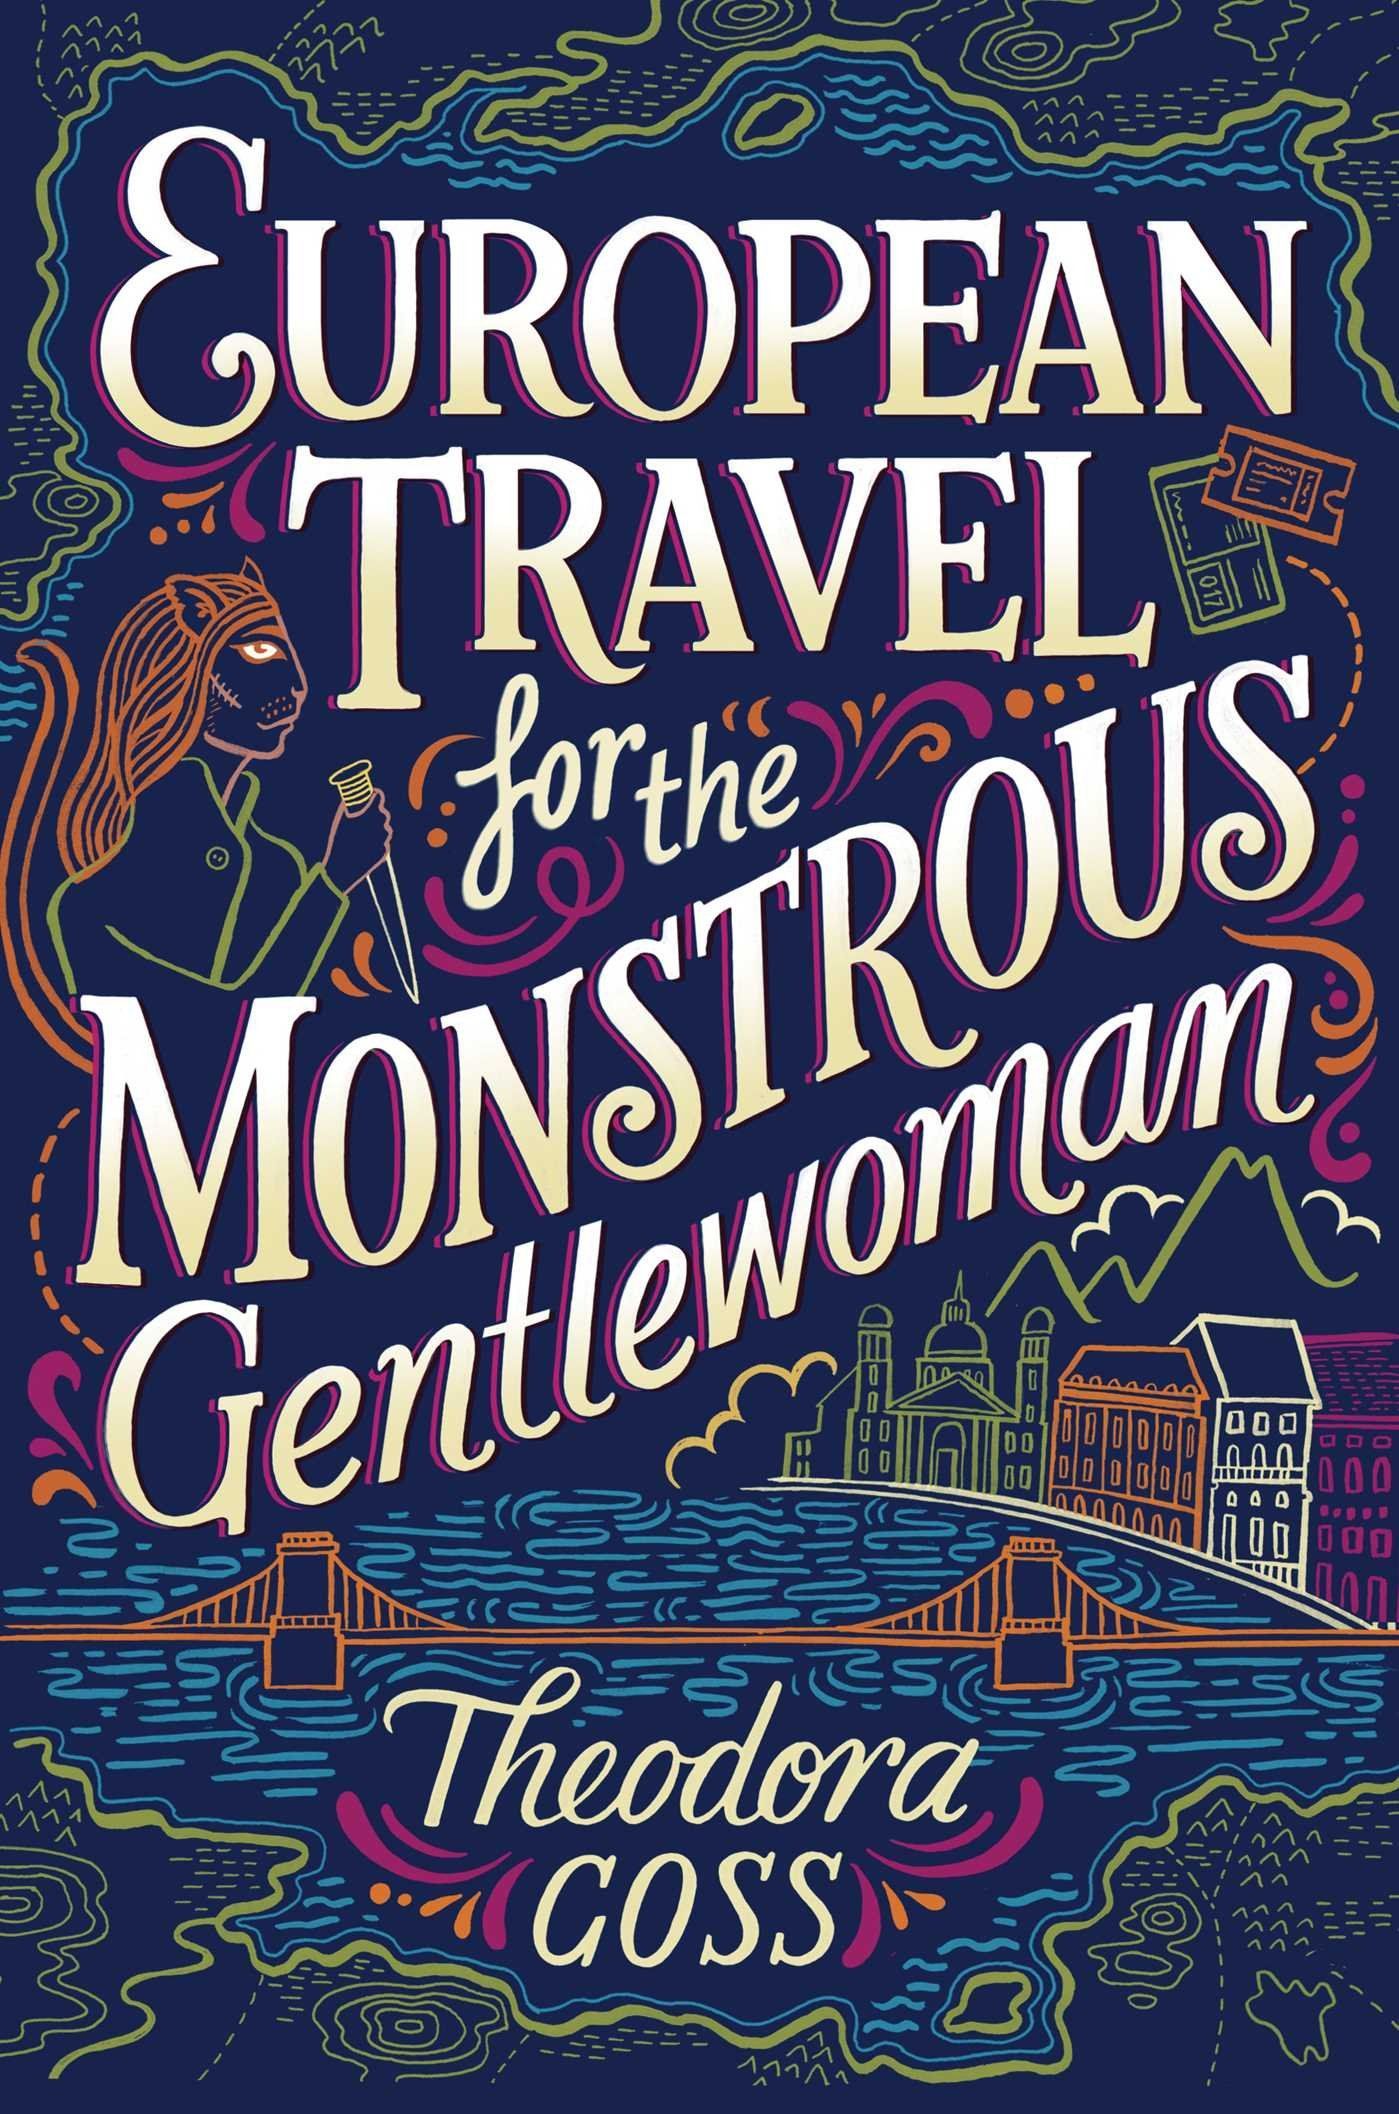 Tales of Monstrous Women: “The Strange Case of the Alchemist’s Daughter” and “European Travel for the Monstrous Gentlewoman” by Theodora Goss